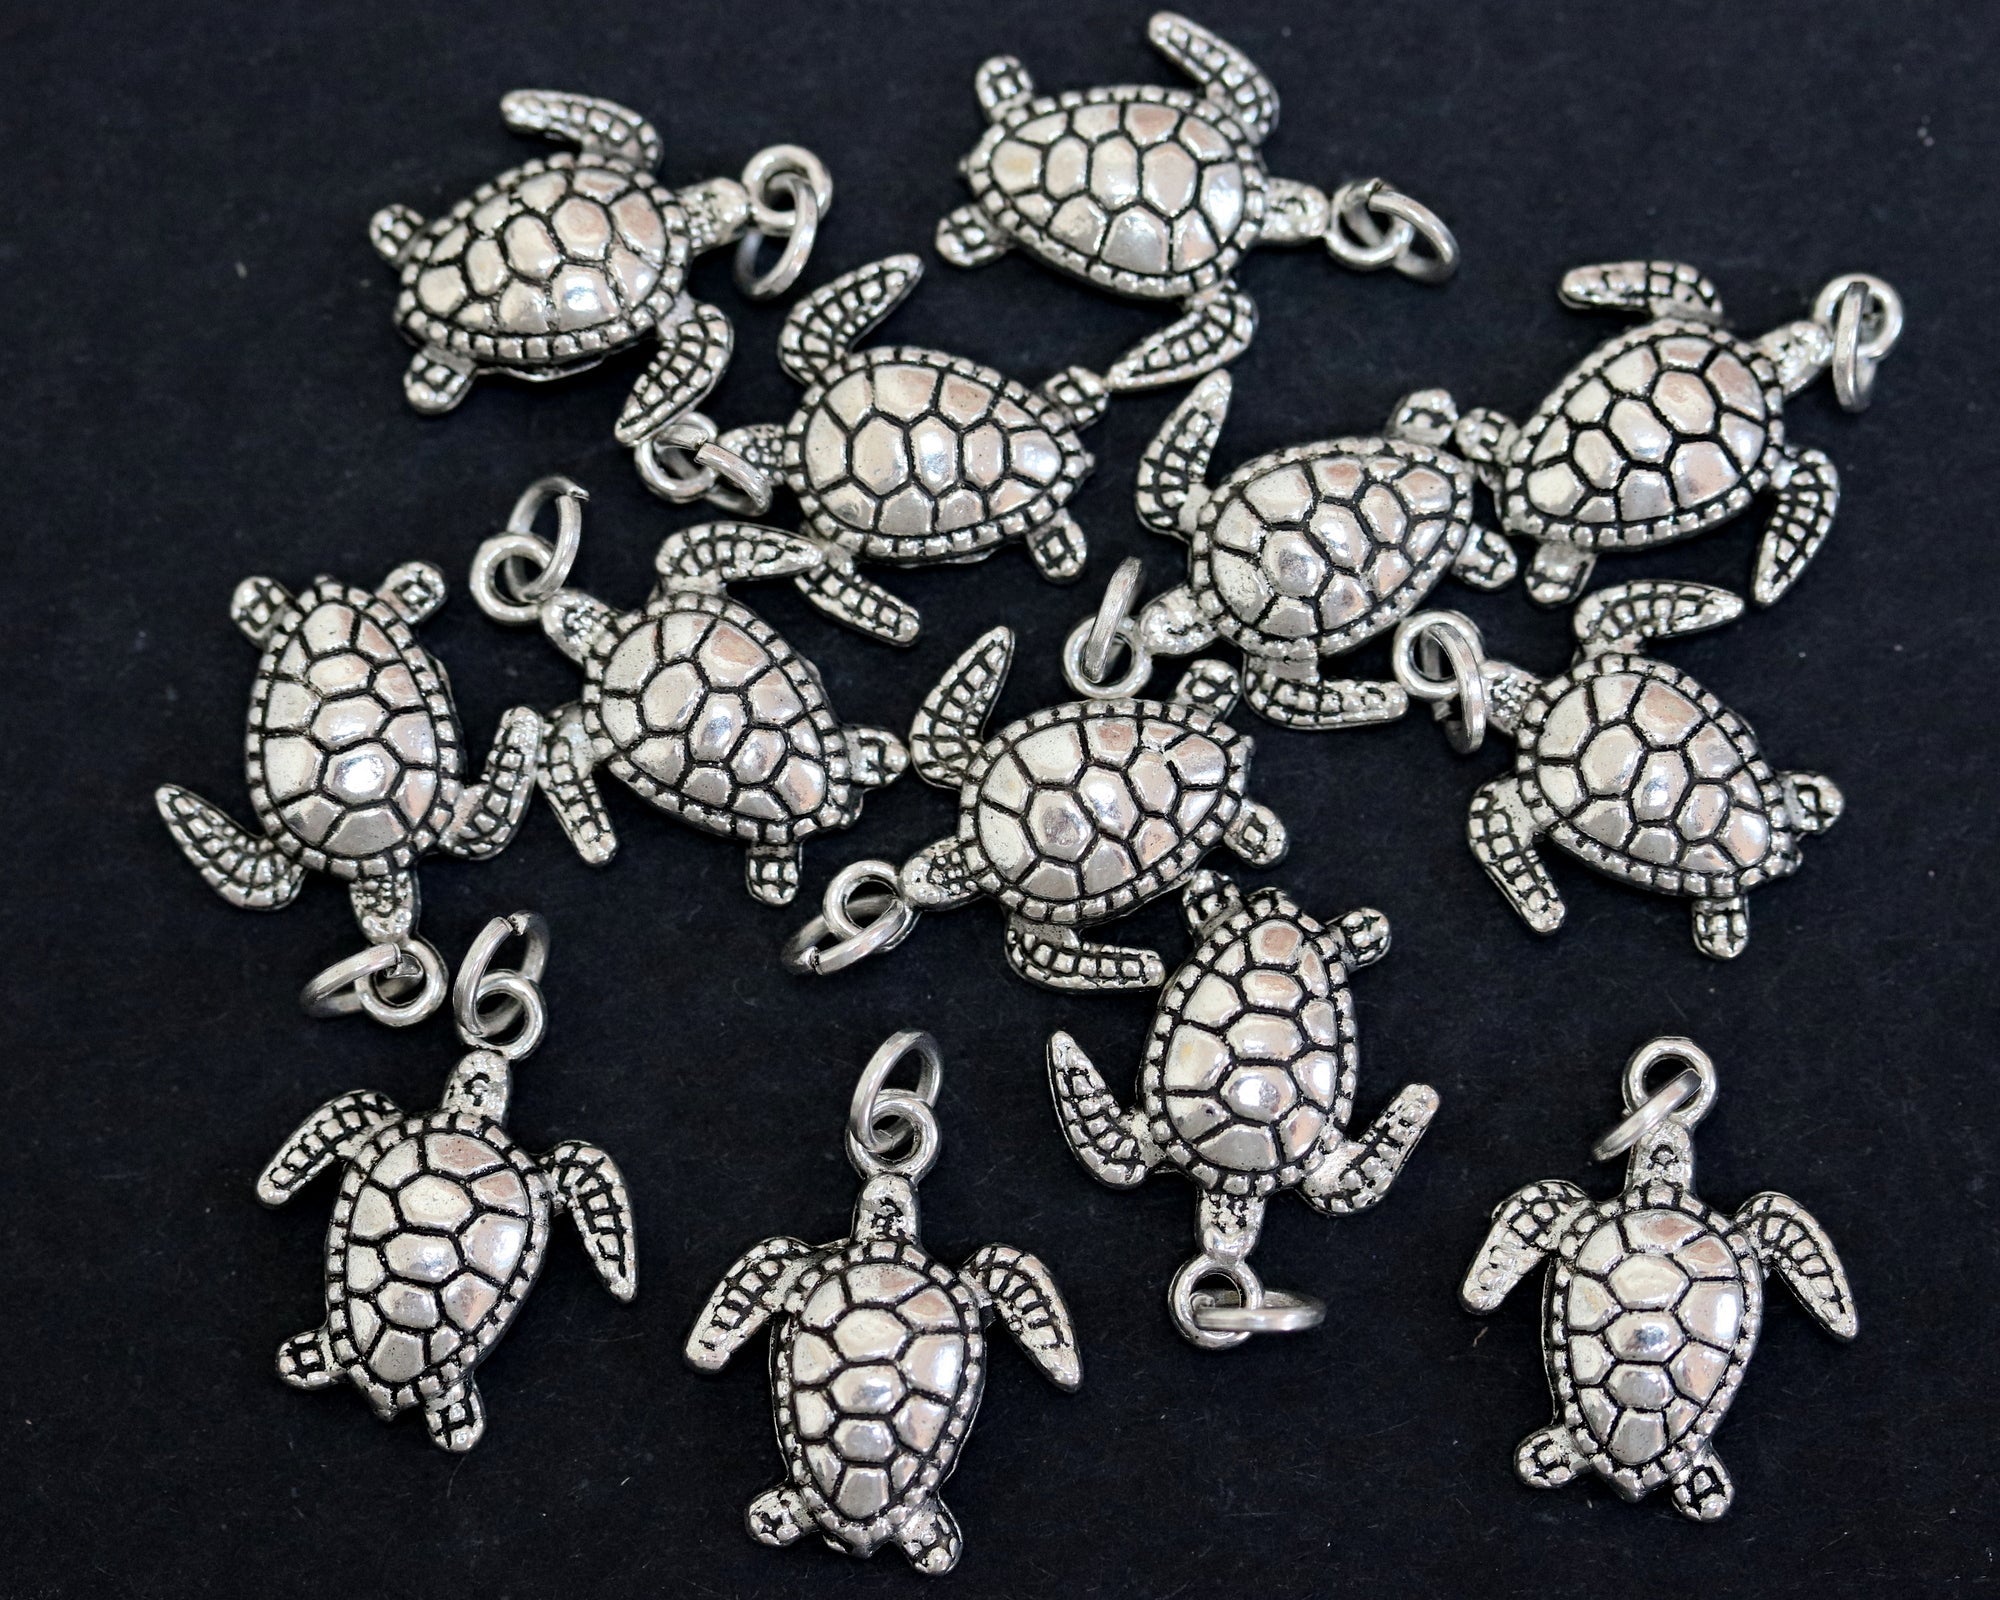 Turtle charm 18x15mm antique silver plated metal alloy pendant